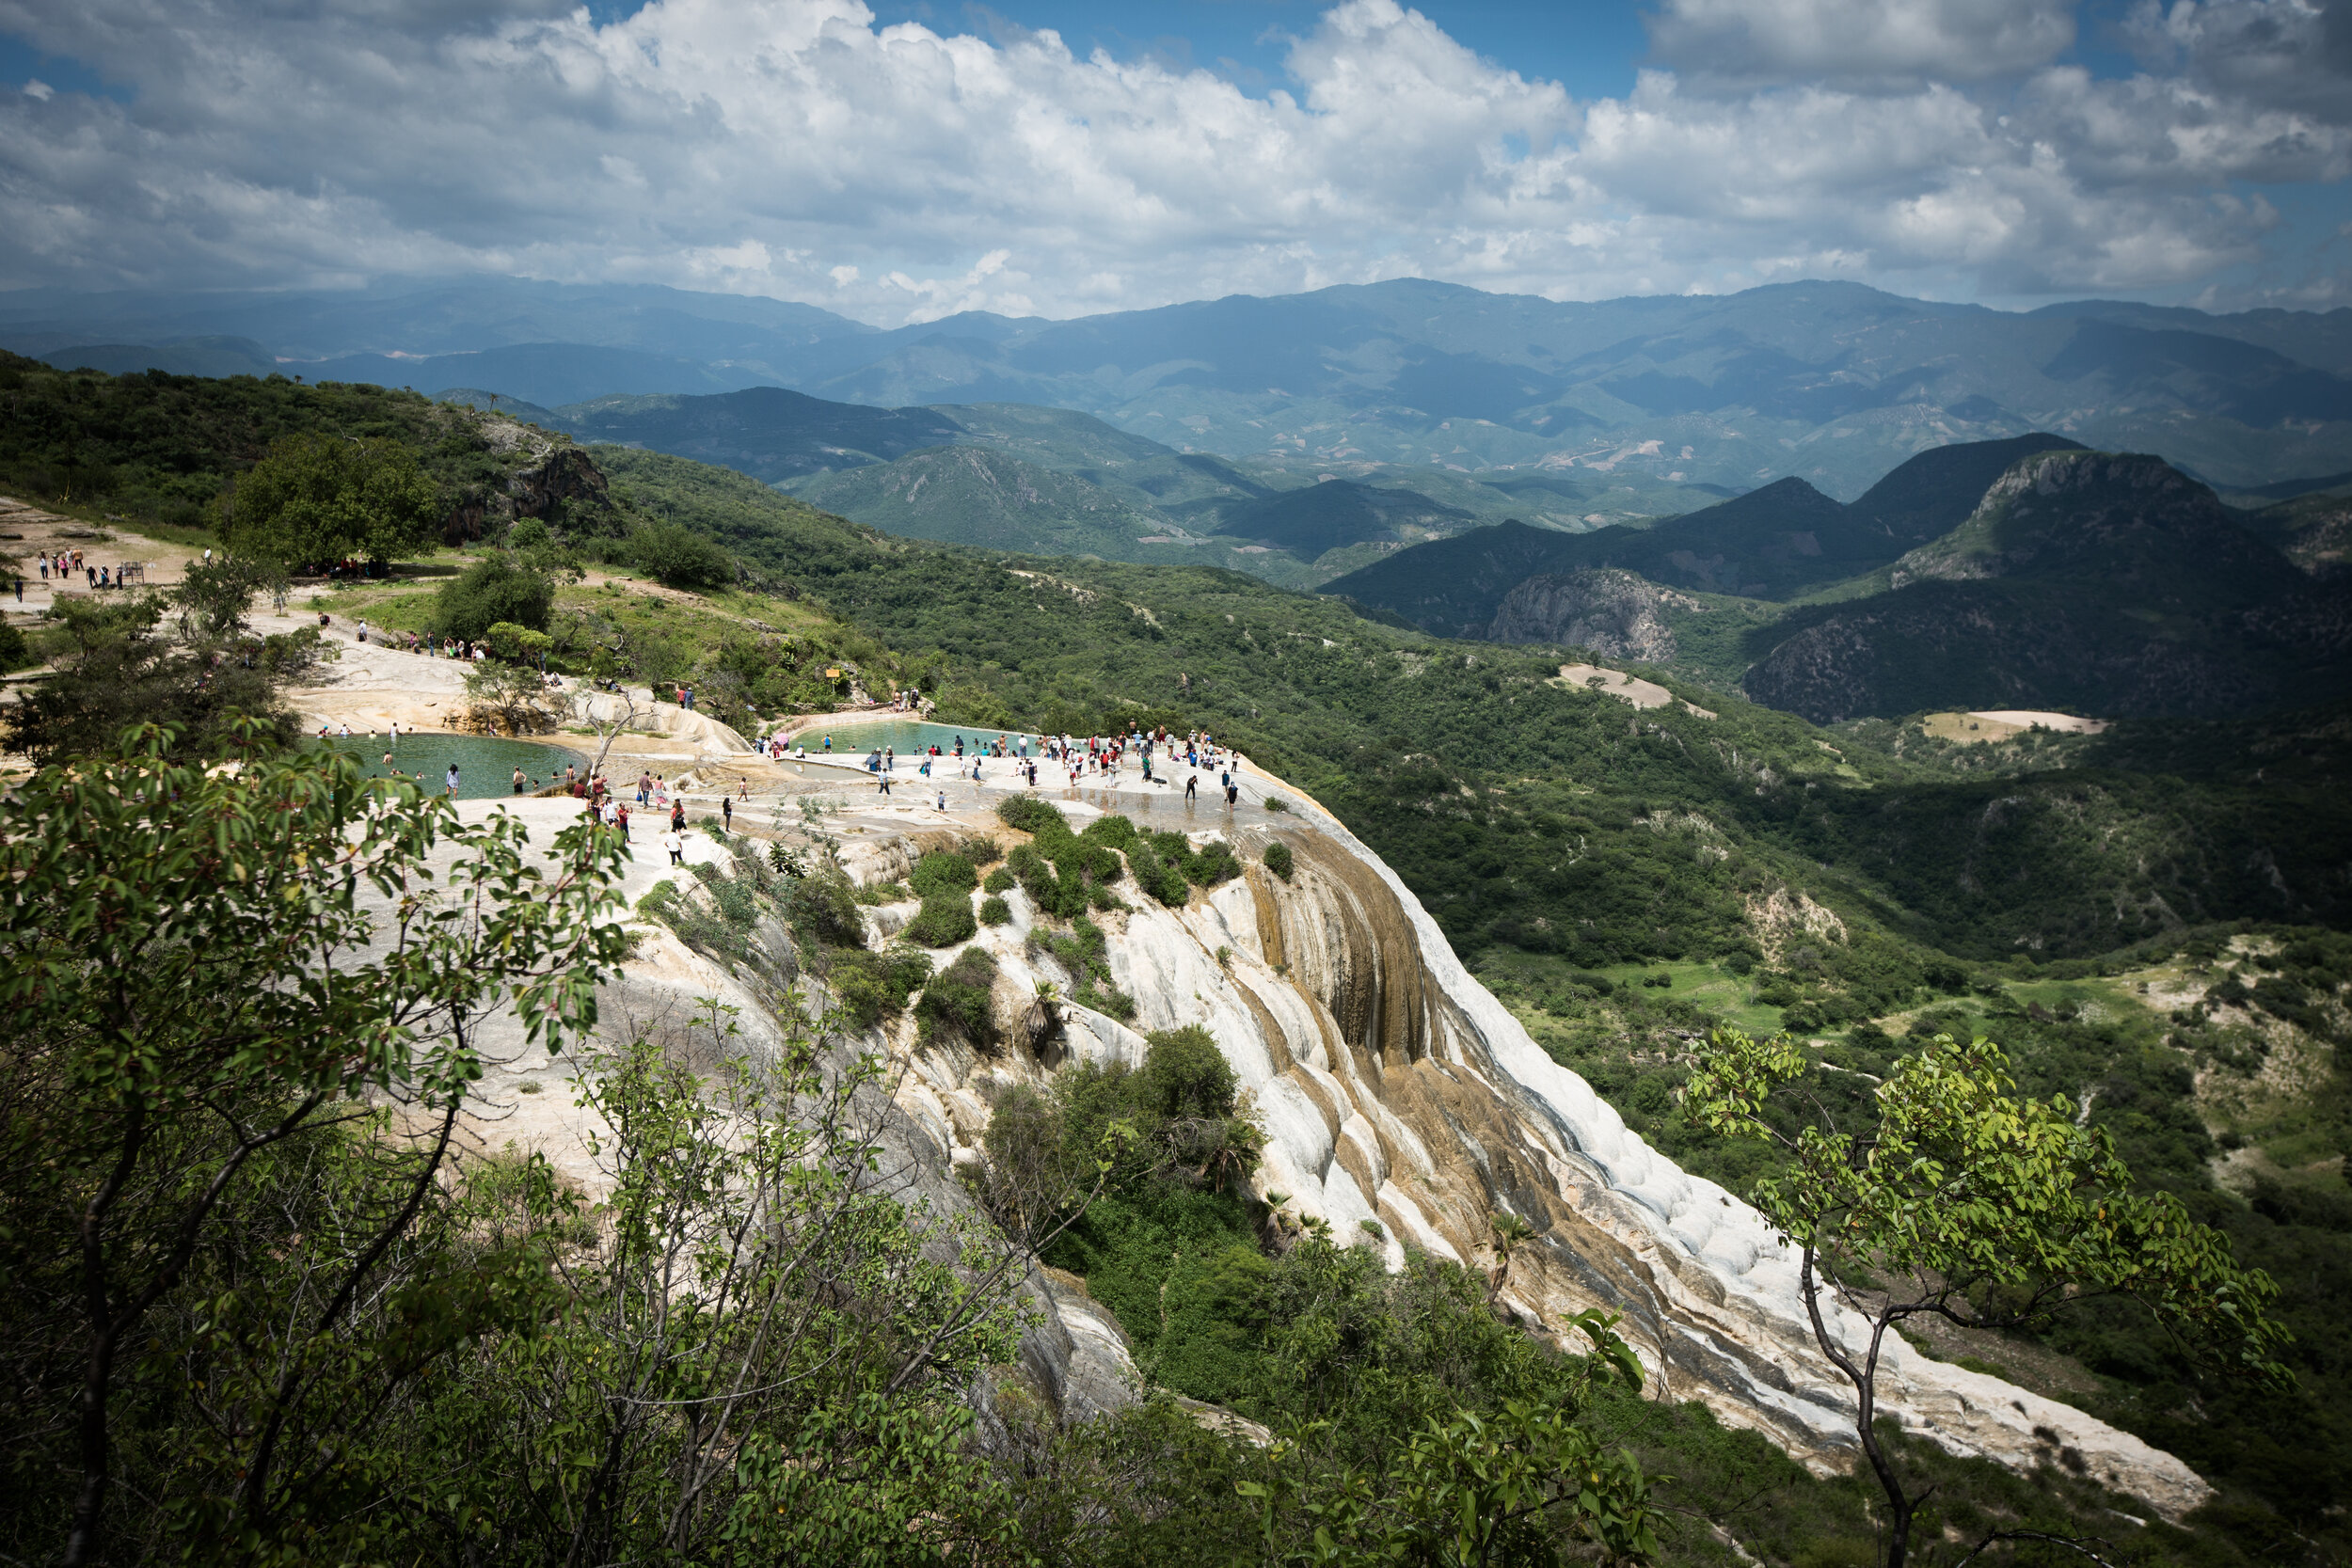  view from a distance of Hierve El Agua, Oaxaca, Mexico, August 2017 